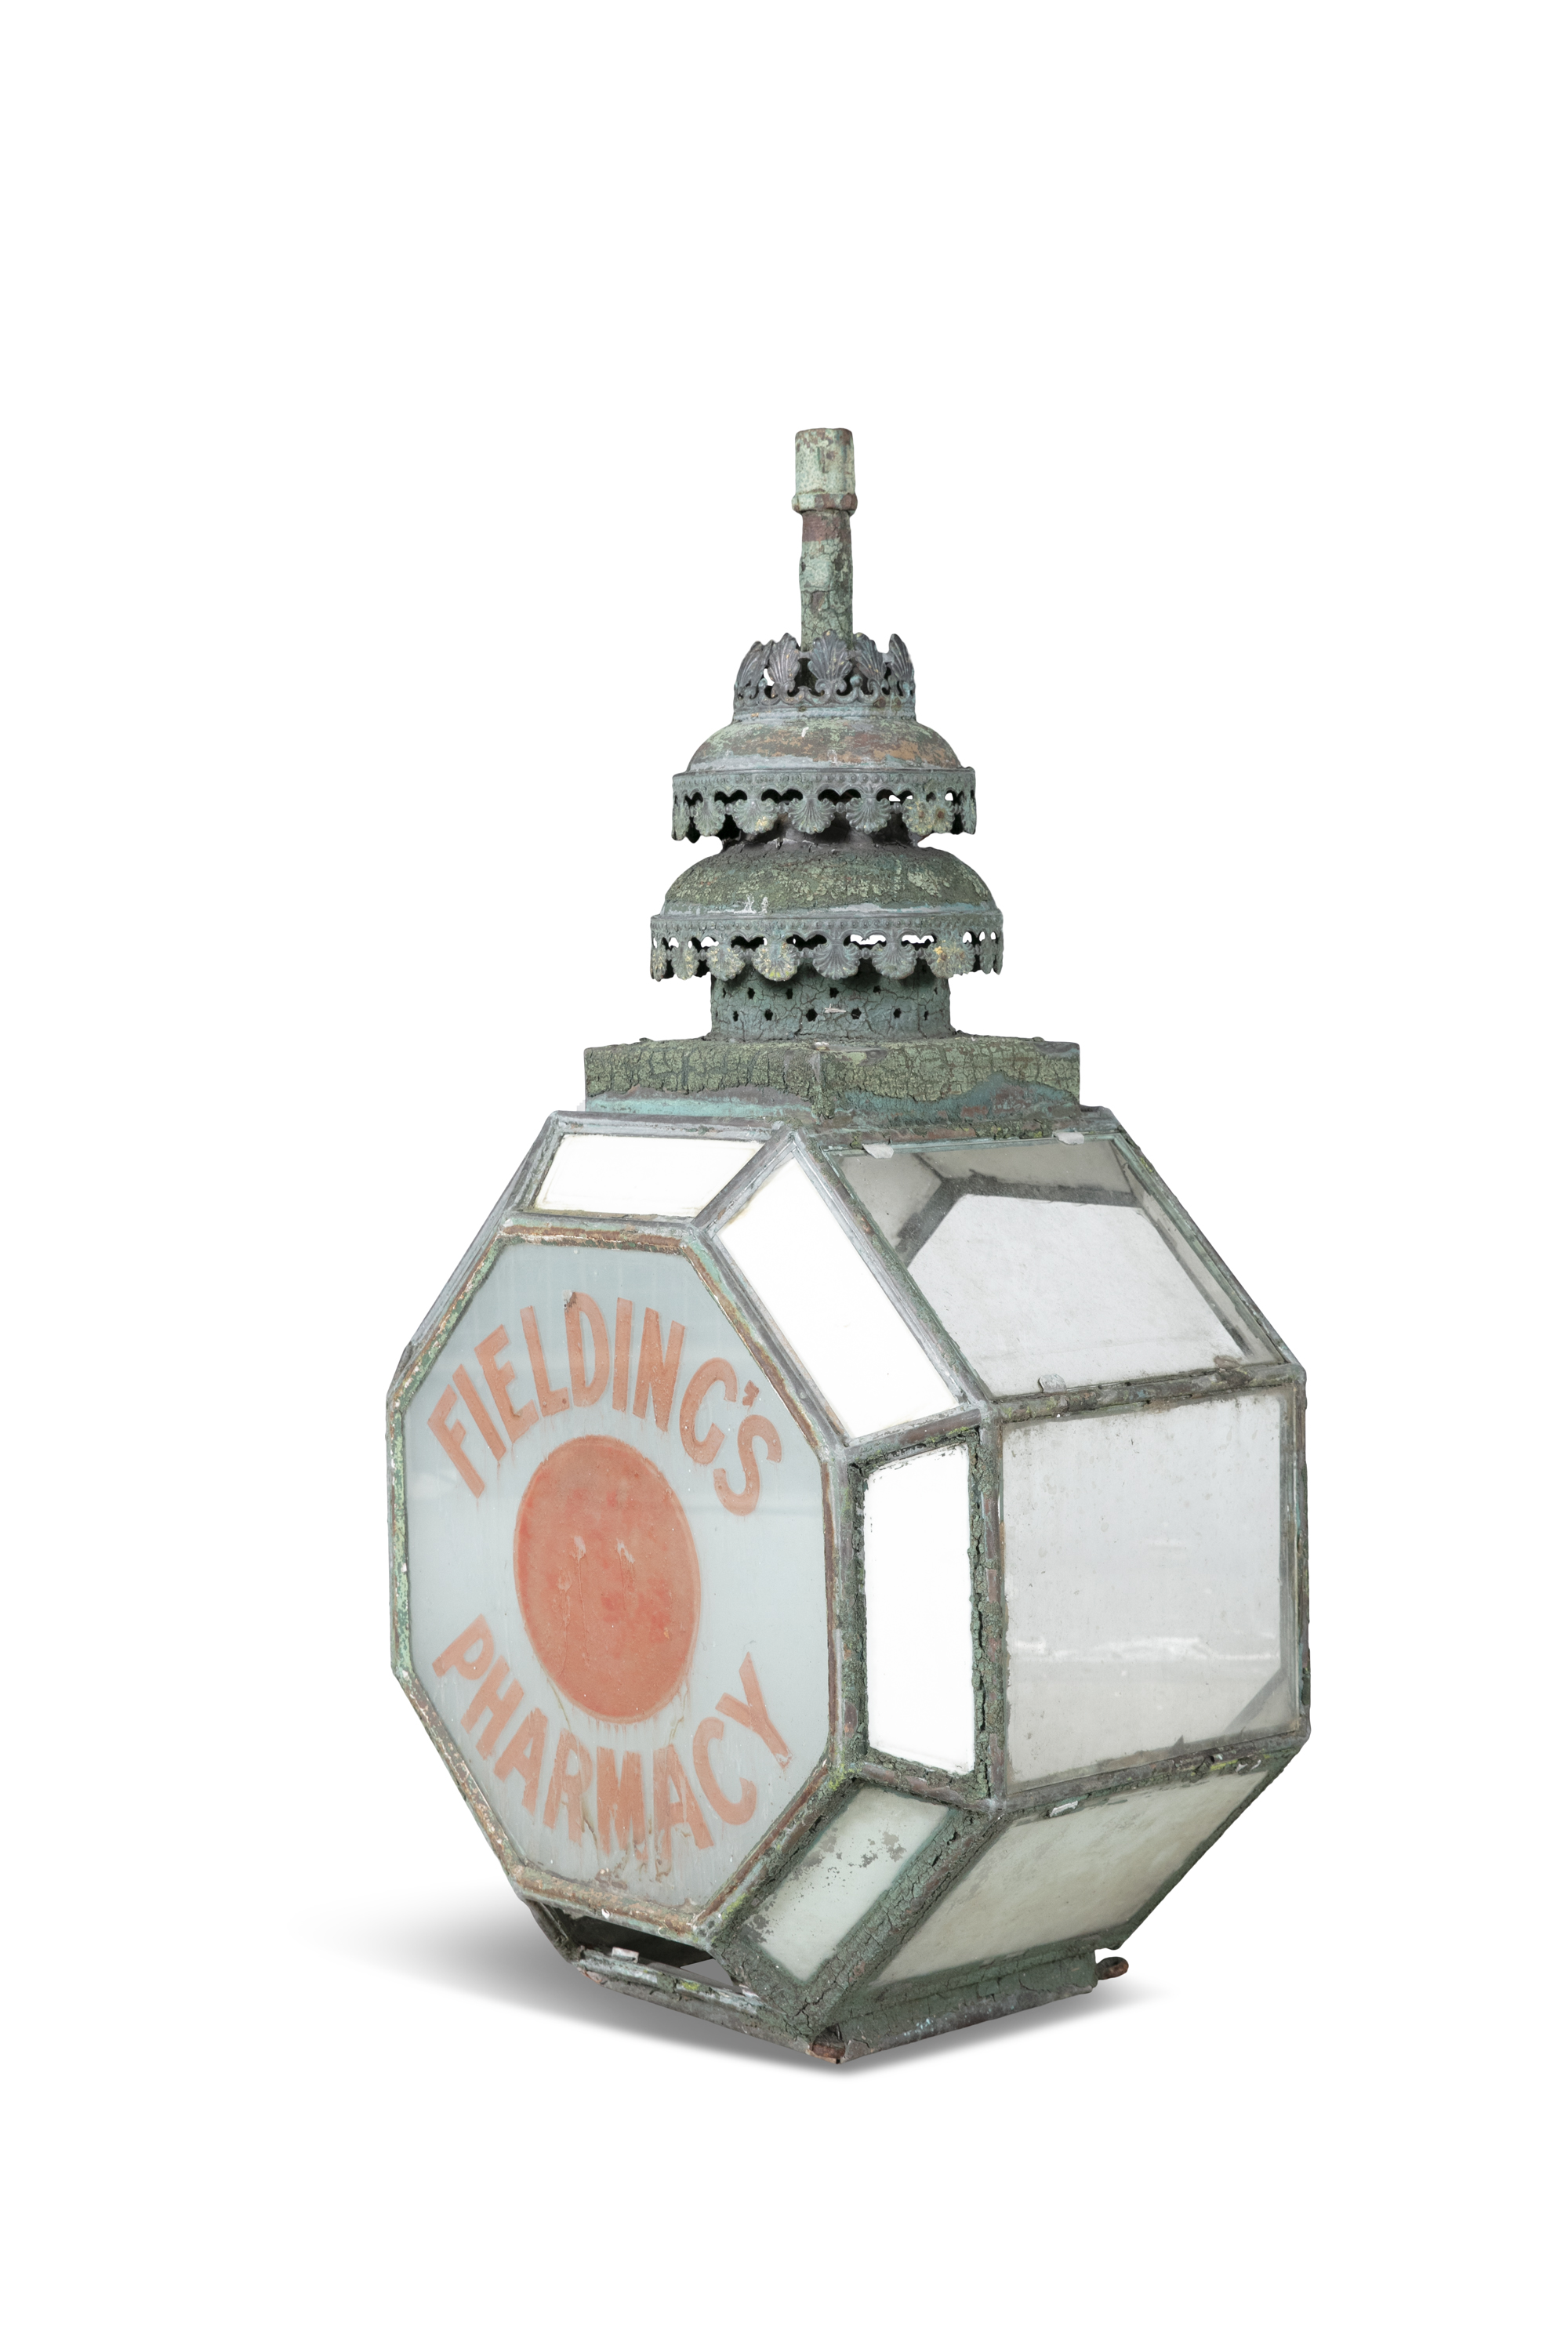 A LATE 19TH CENTURY METAL FRAMED ILLUMINATED DISPLAY SIGN FOR FIELDING'S PHARMACY, of octagonal form